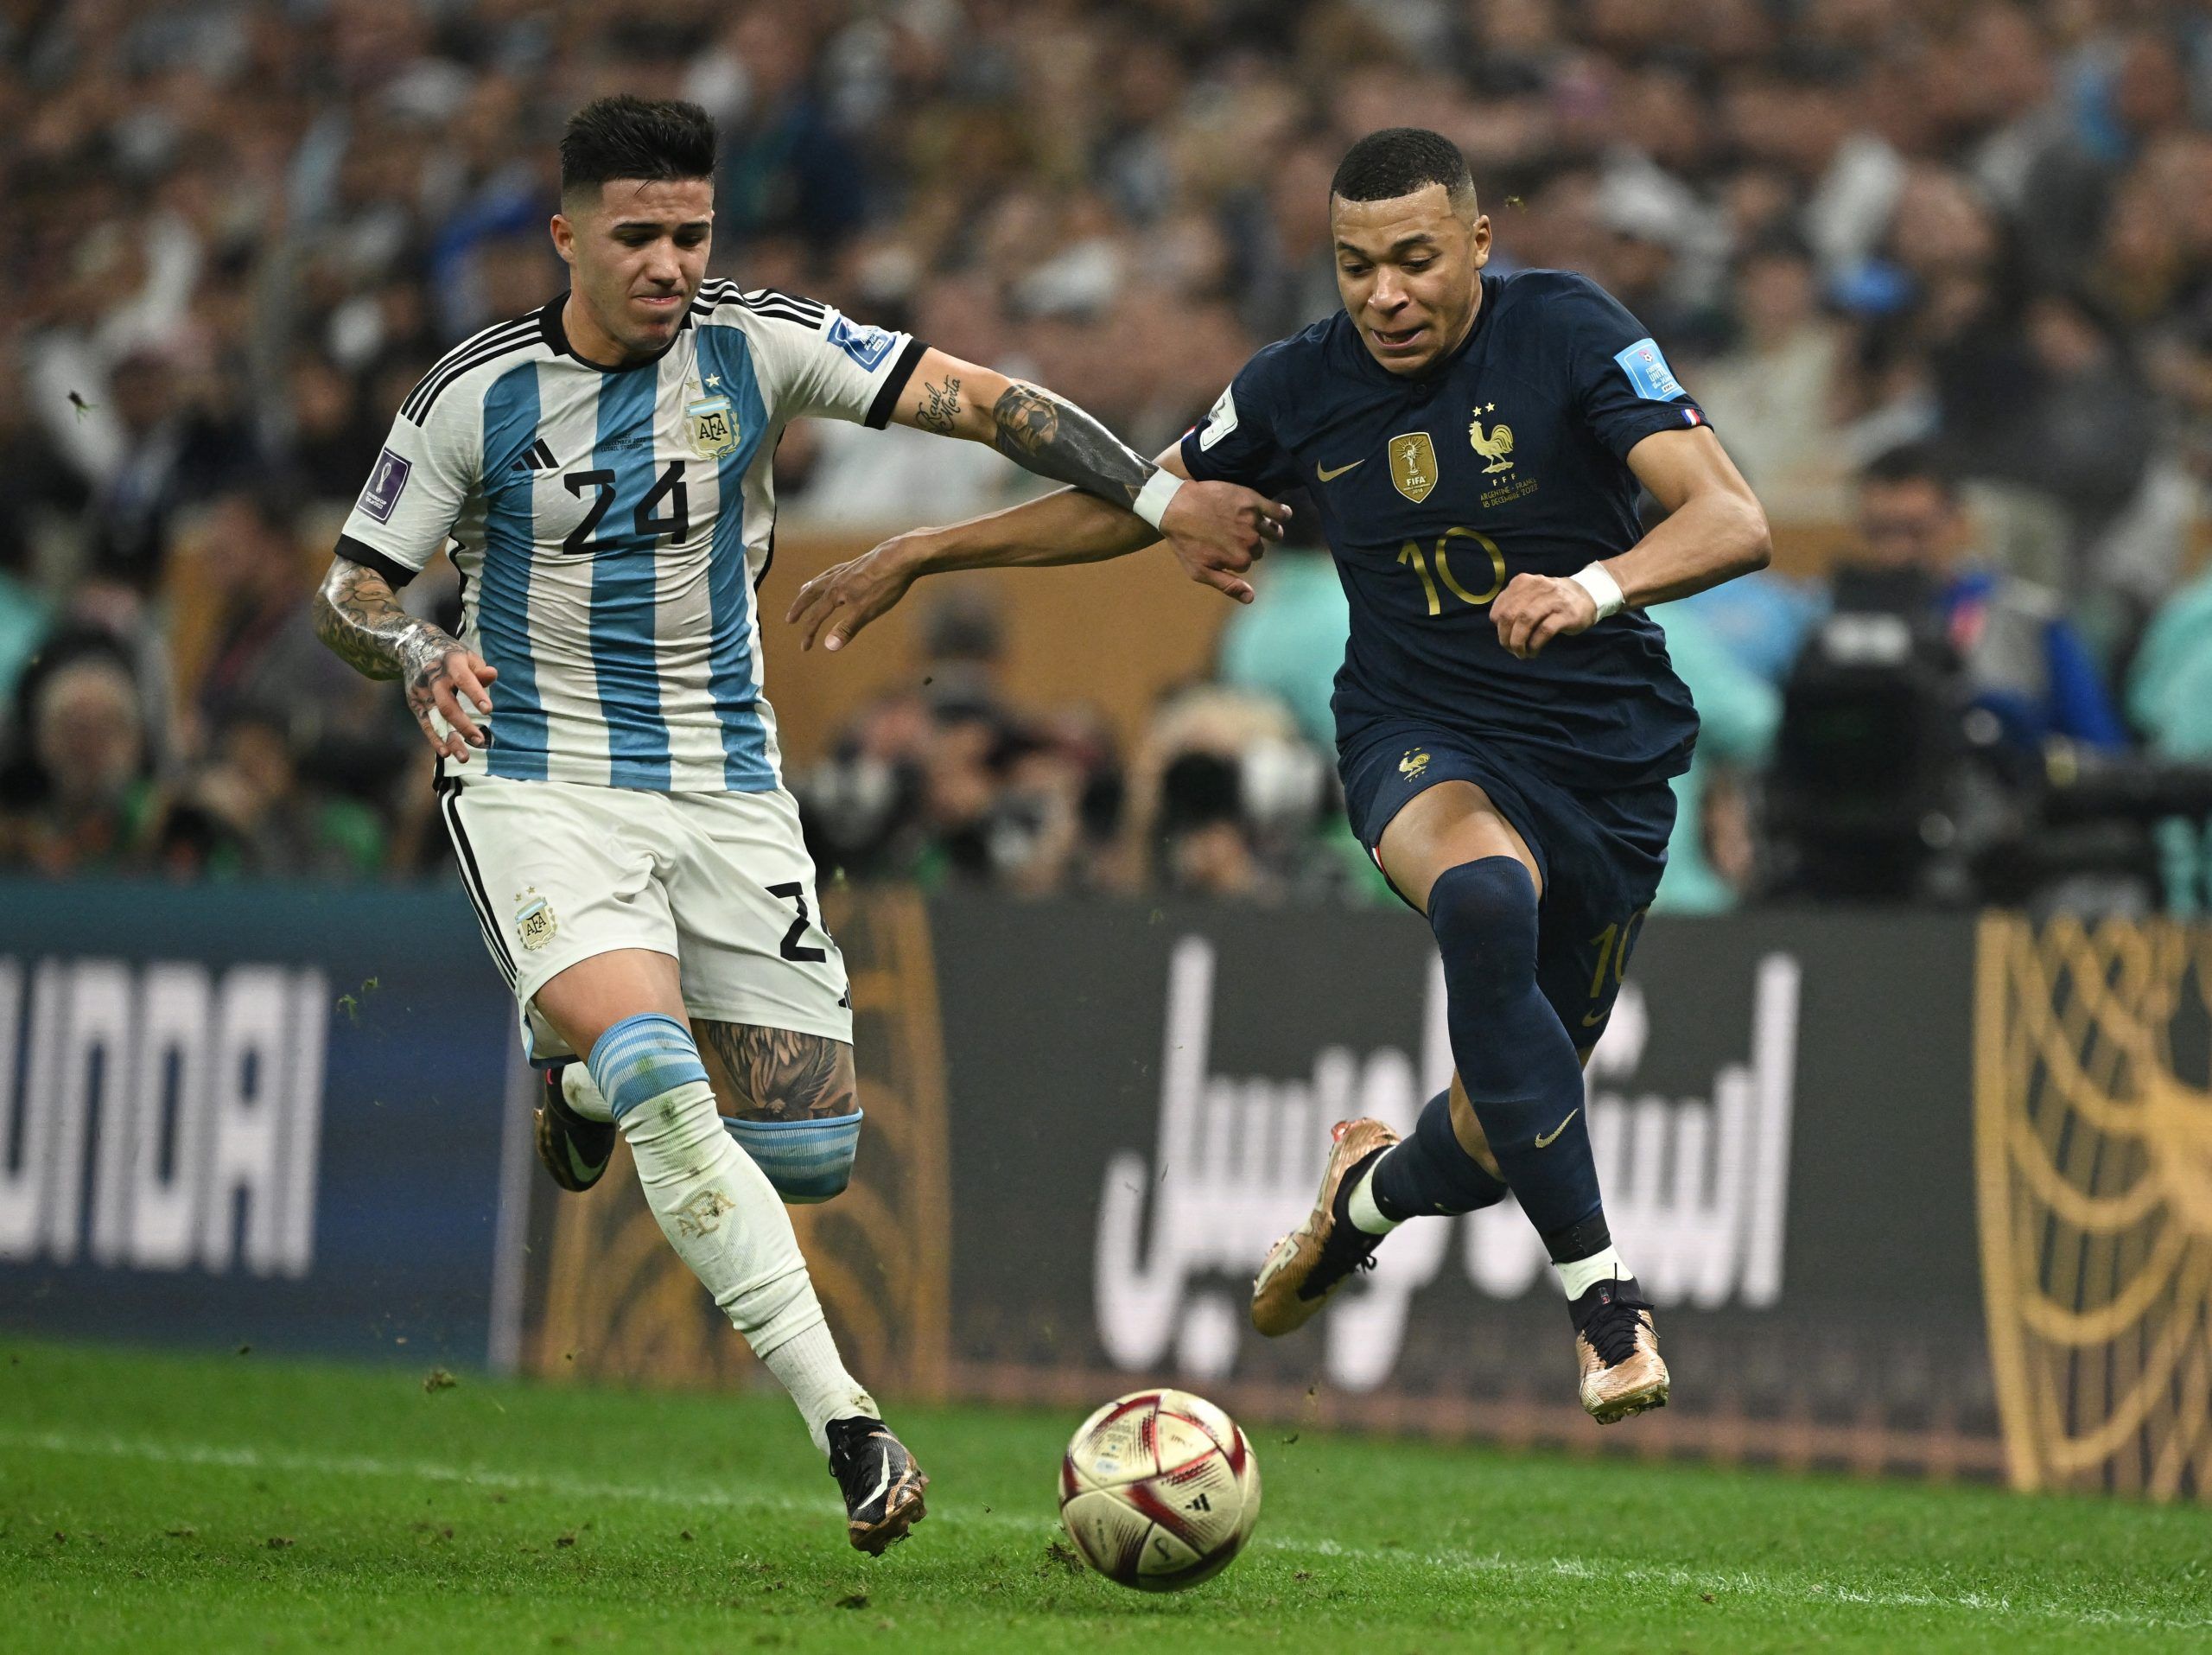 Soccer Football - FIFA World Cup Qatar 2022 - Final - Argentina v France - Lusail Stadium, Lusail, Qatar - December 18, 2022  France's Kylian Mbappe in action with Argentina's Enzo Fernandez REUTERS/Dylan Martinez